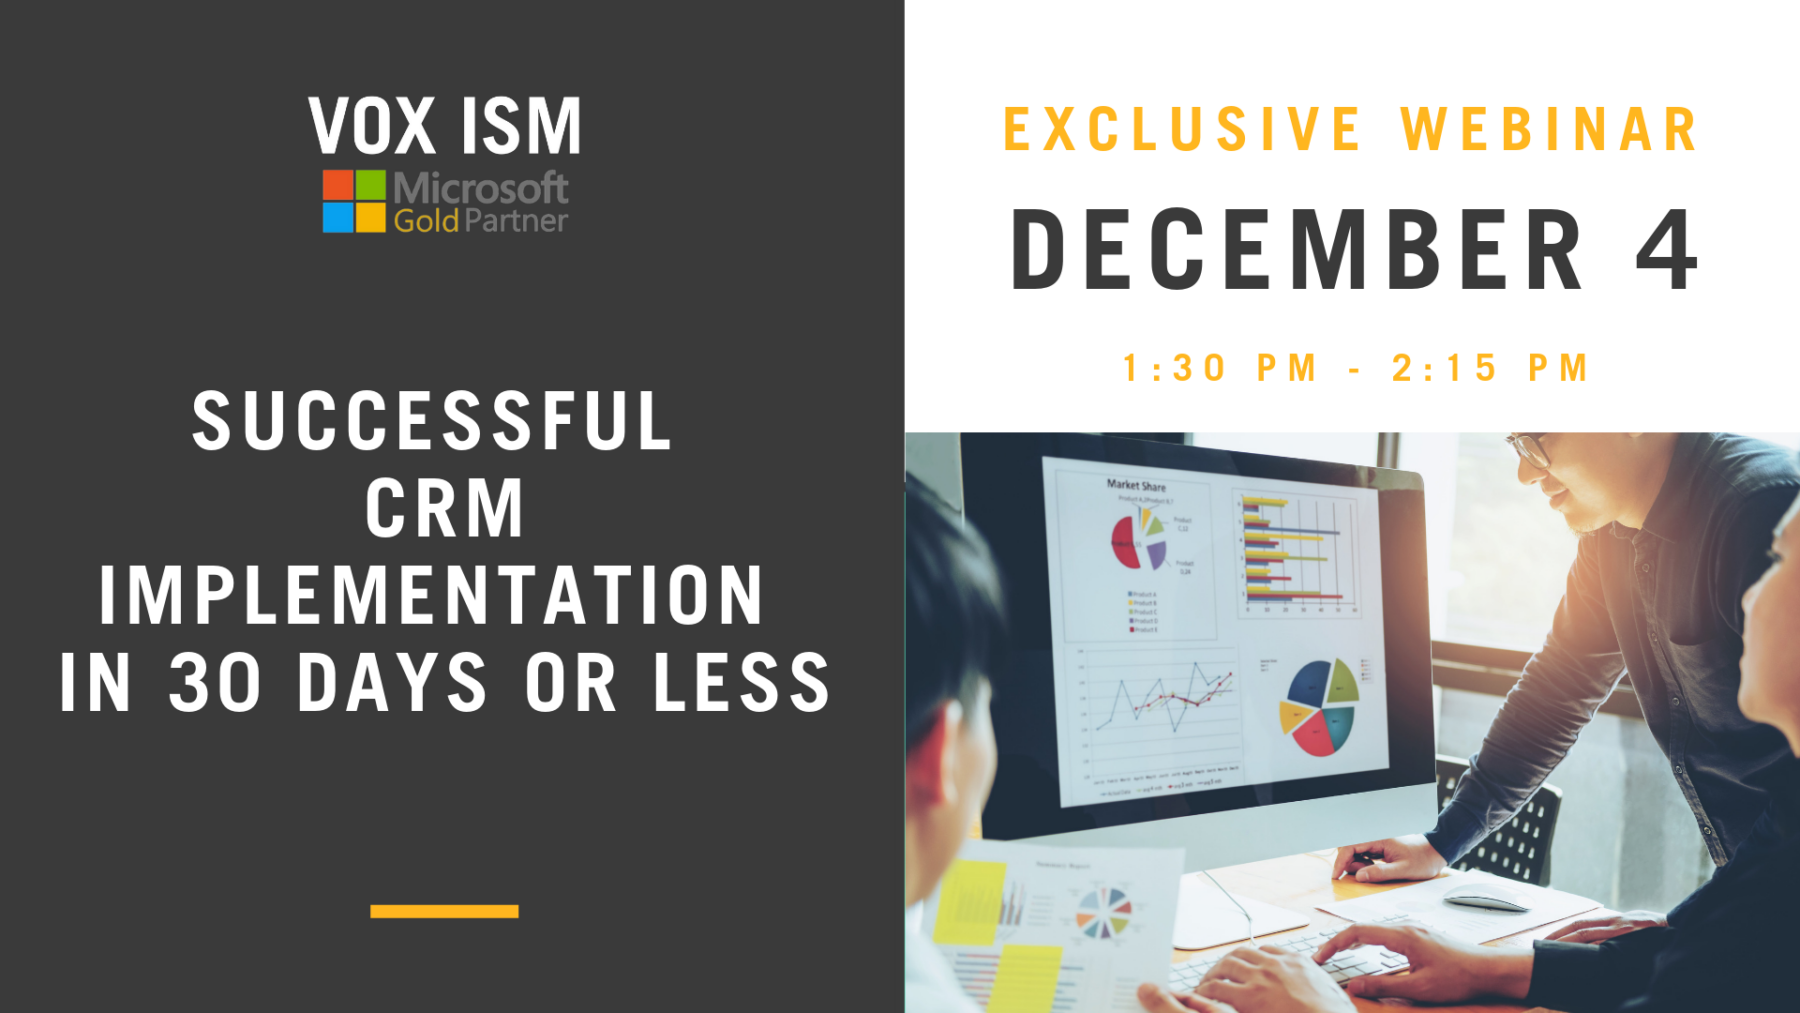 Successful CRM Implementation in 30 days or less - December 4 - Webinar - VOX ISM